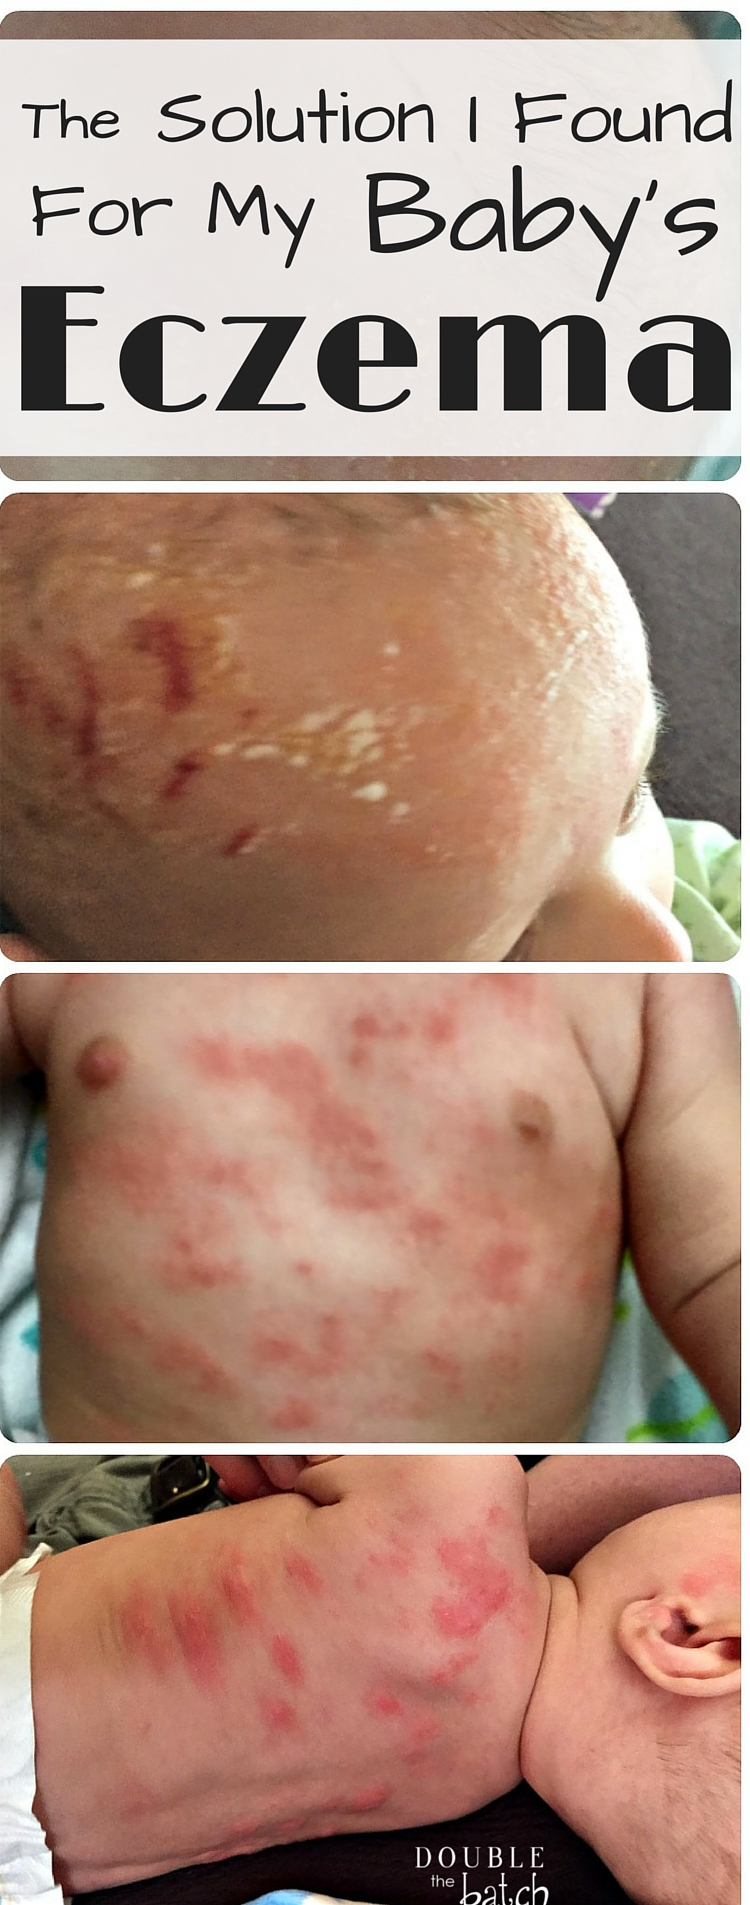 After Exhausting Myself with various different things, we finally found a solution for my baby's eczema!